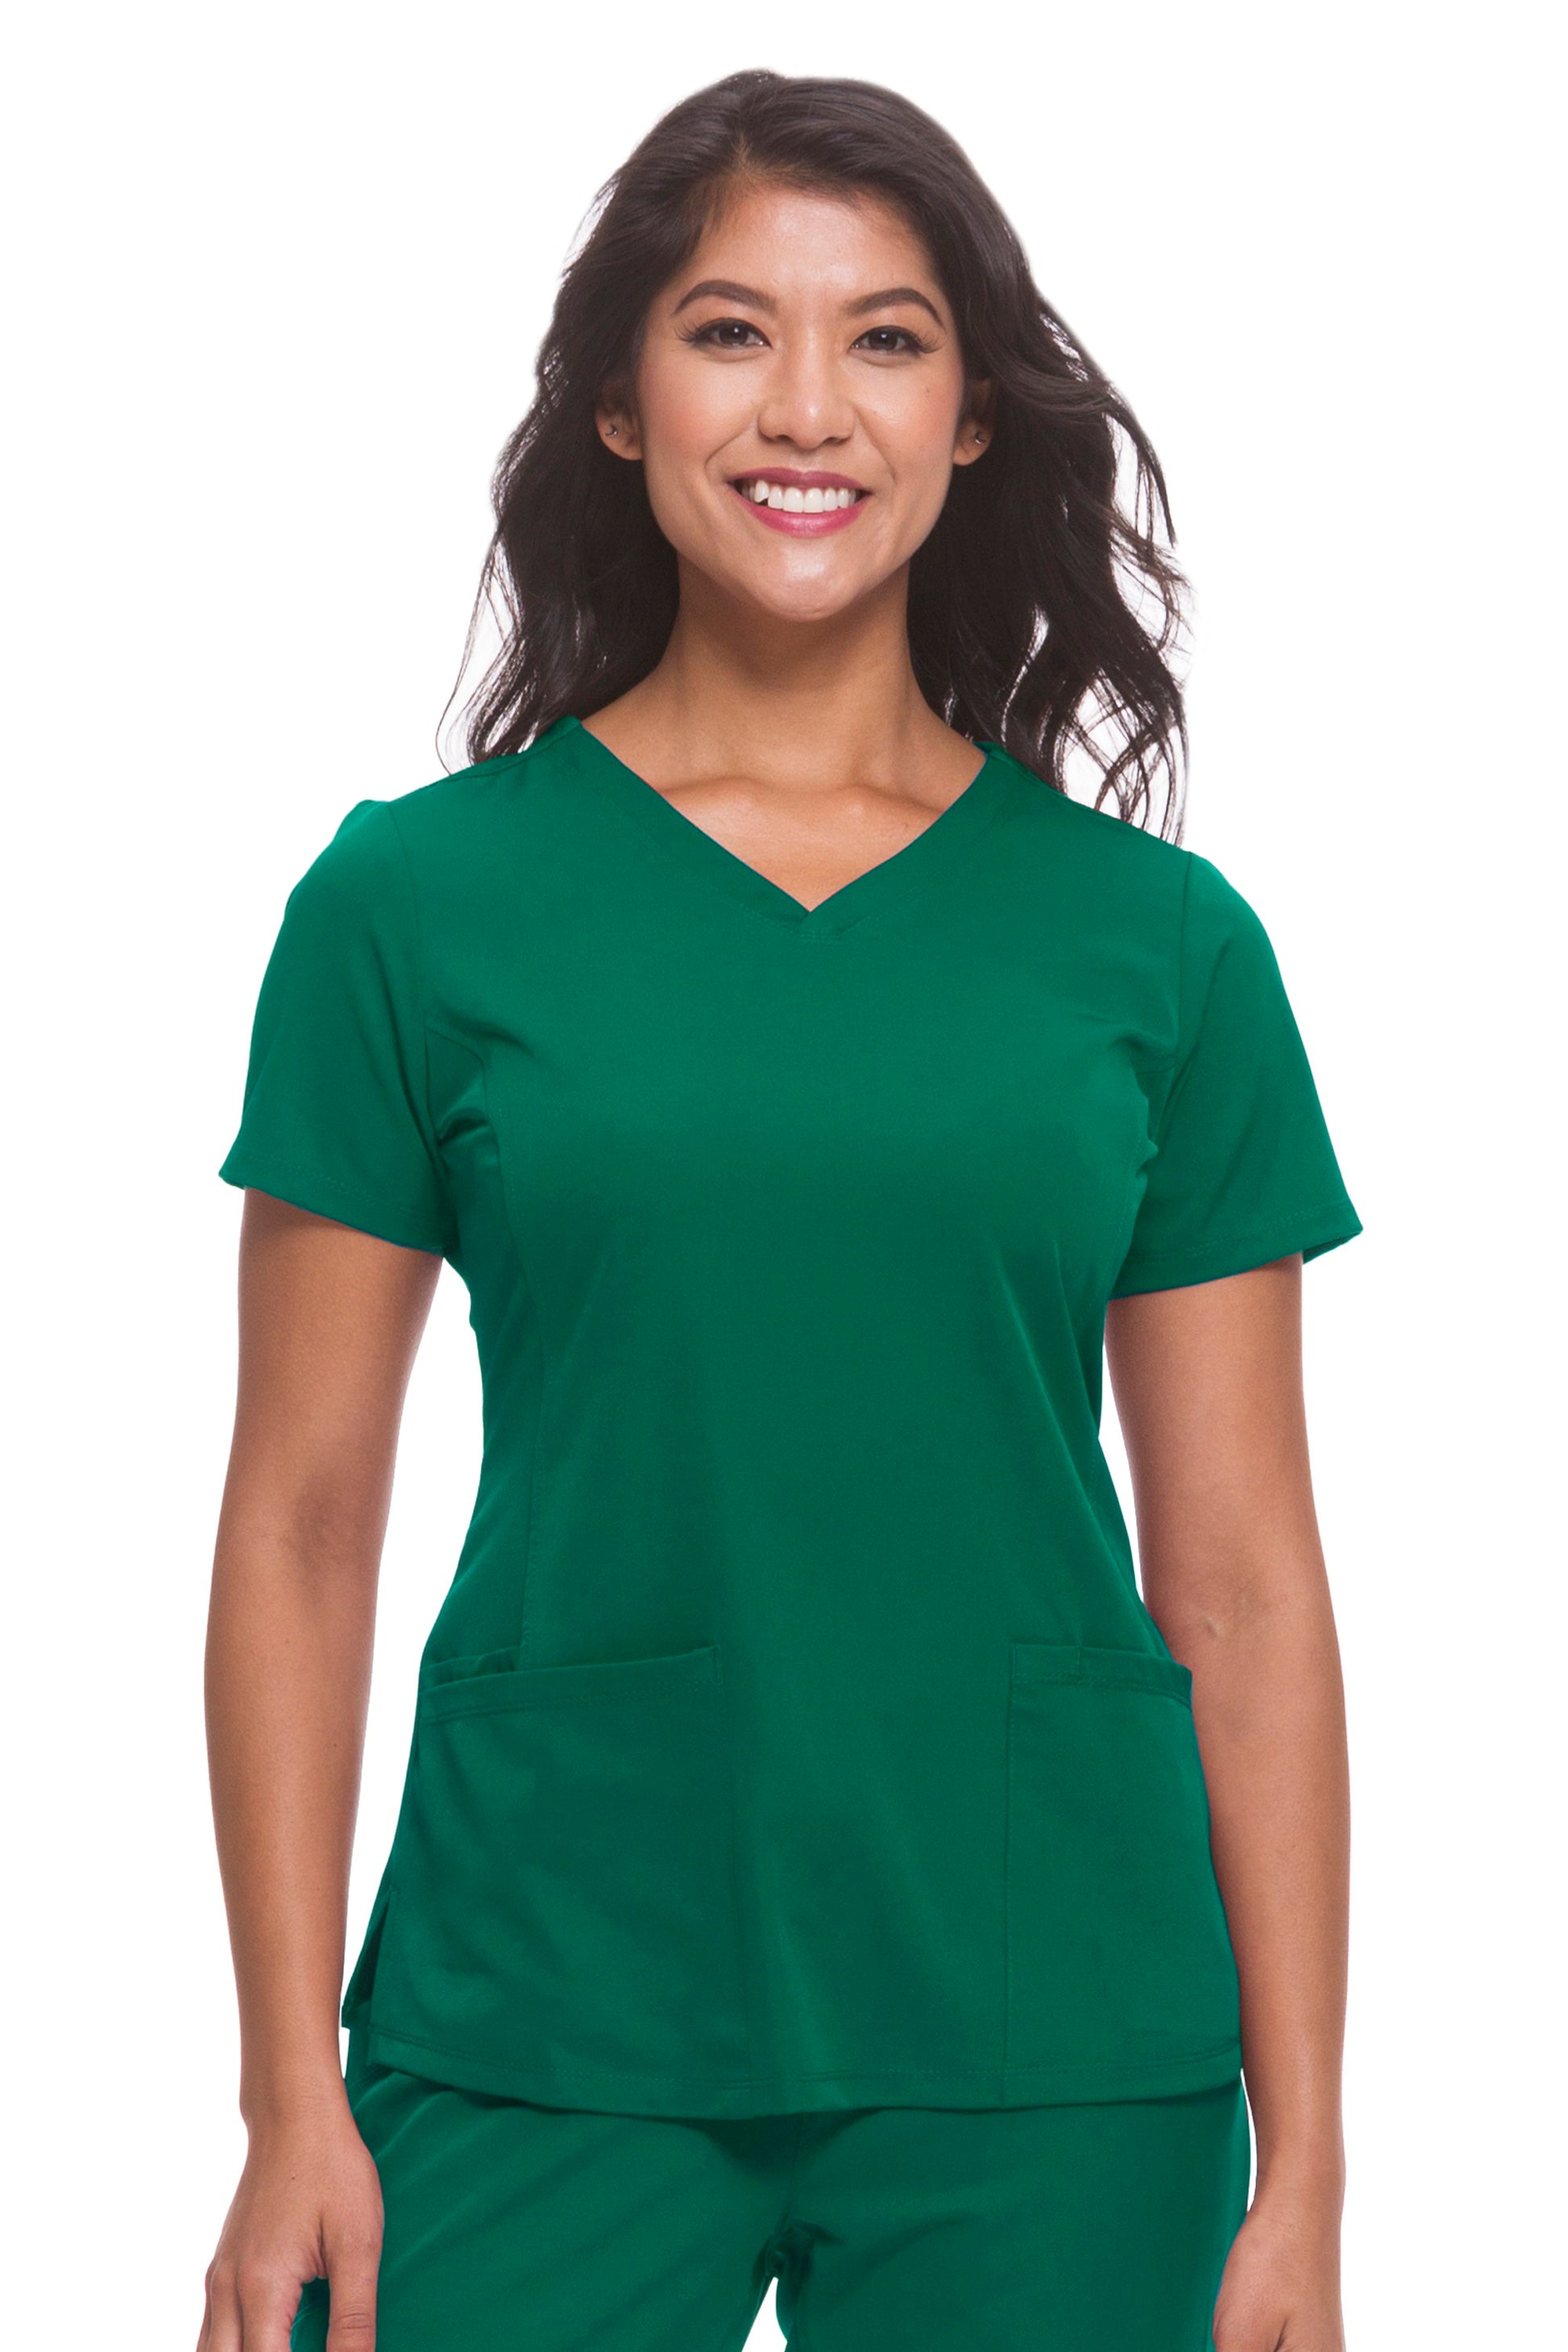 Healing Hands HH Works Monica V-Neck Scrub Top in Hunter at Parker's Clothing and Shoes